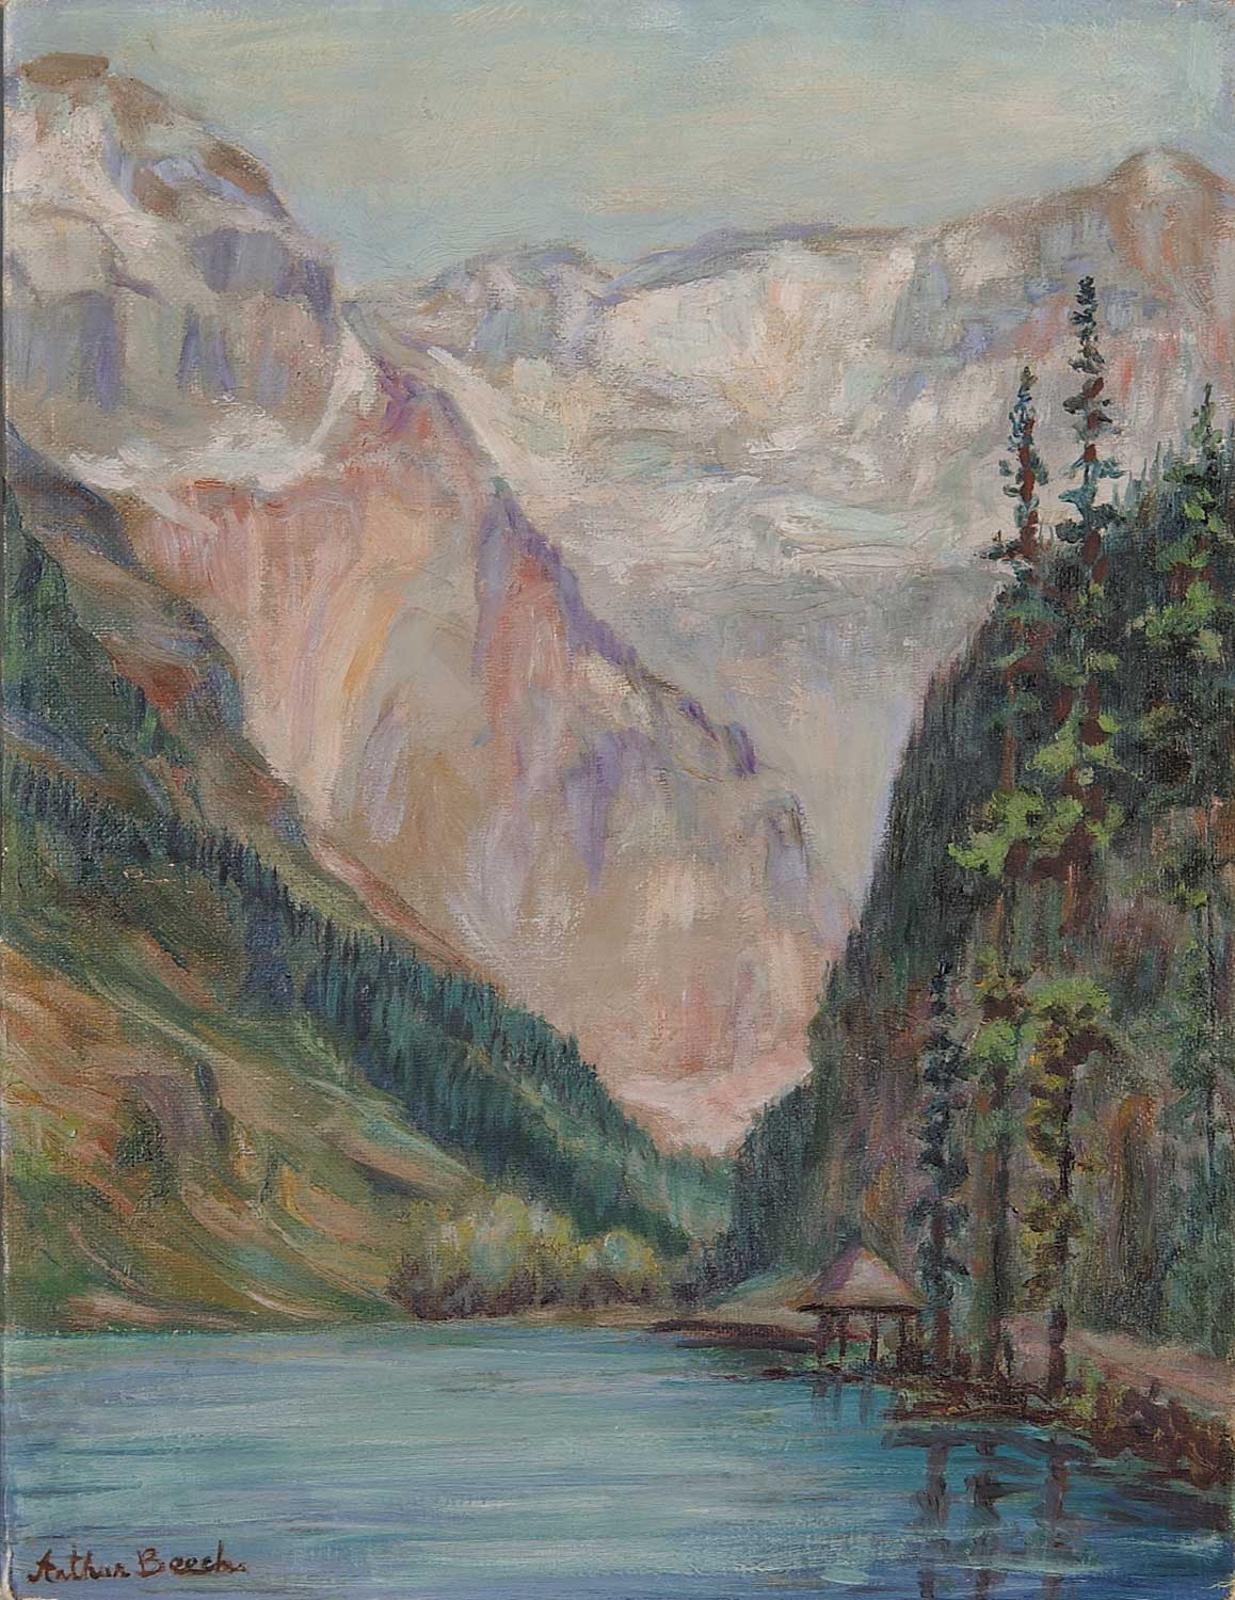 Arthur B. Beech - Unttiled - Mount Victoria from Lake Louise